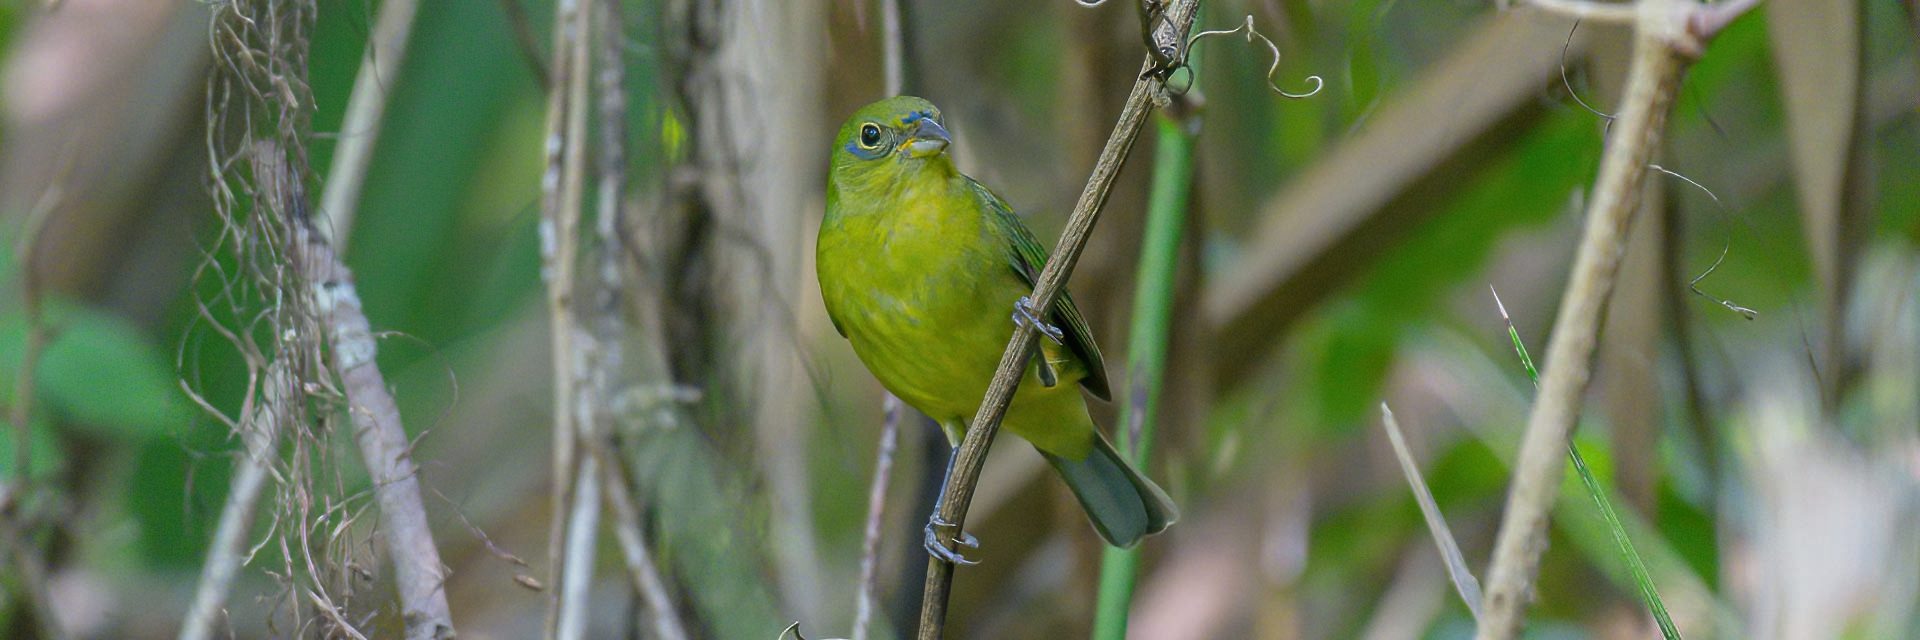 170416 Painted Bunting - CSS 1676- 1920x640